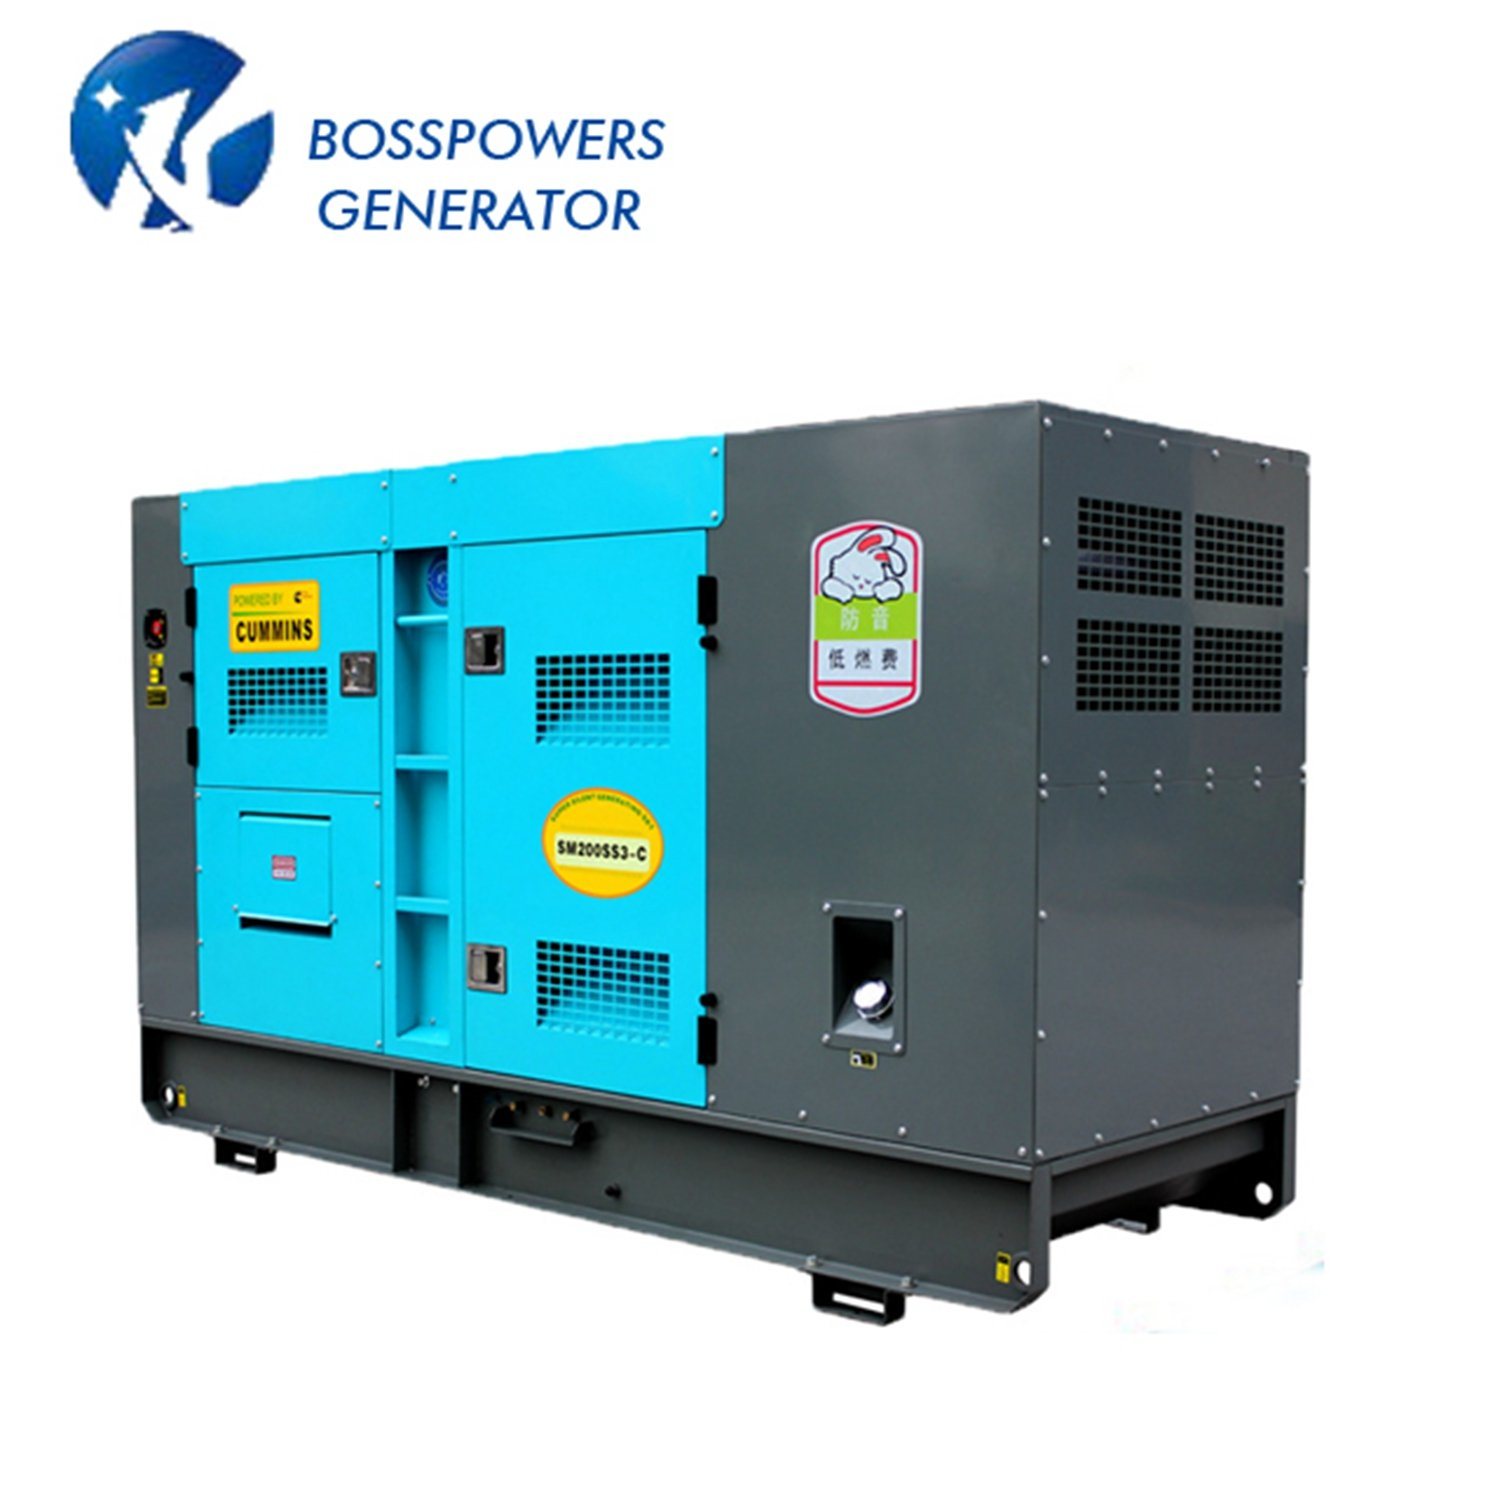 Sc25g610d2 350kw Diesel Generator Three Phase Water Cool Soundproof Canopy